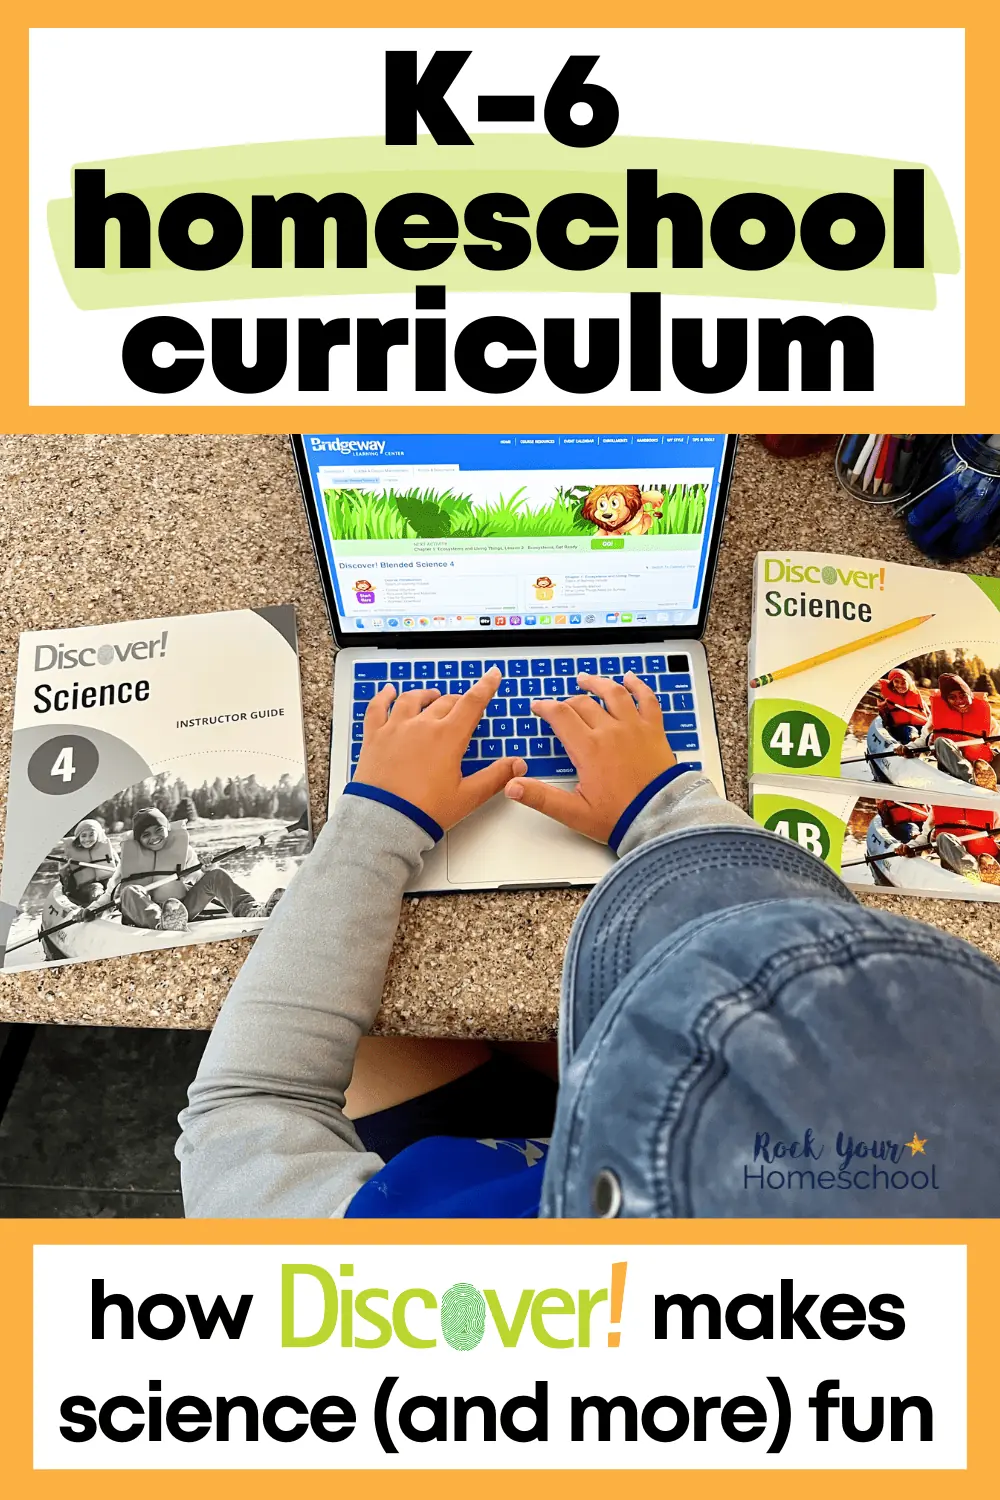 K-6 Homeschool Curriculum: How Discover! Makes Science (and More) Fun